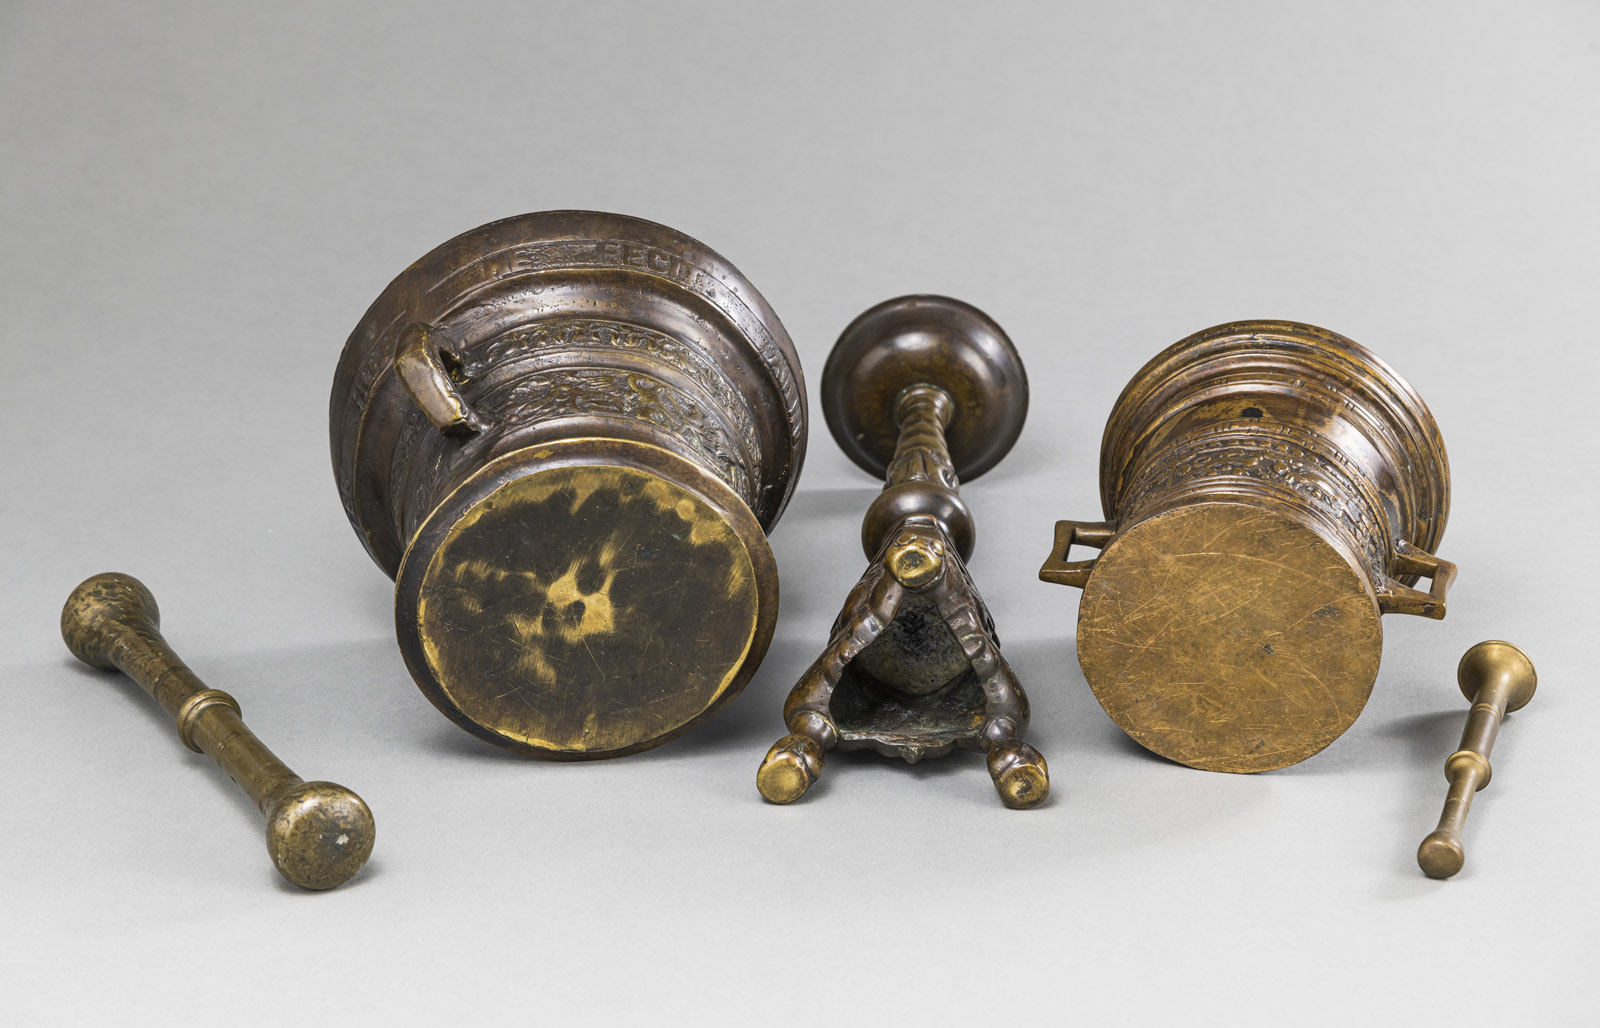 TWO BRONZE MORTARS WITH PESTLES AND A CANDLESTICK - Image 4 of 4